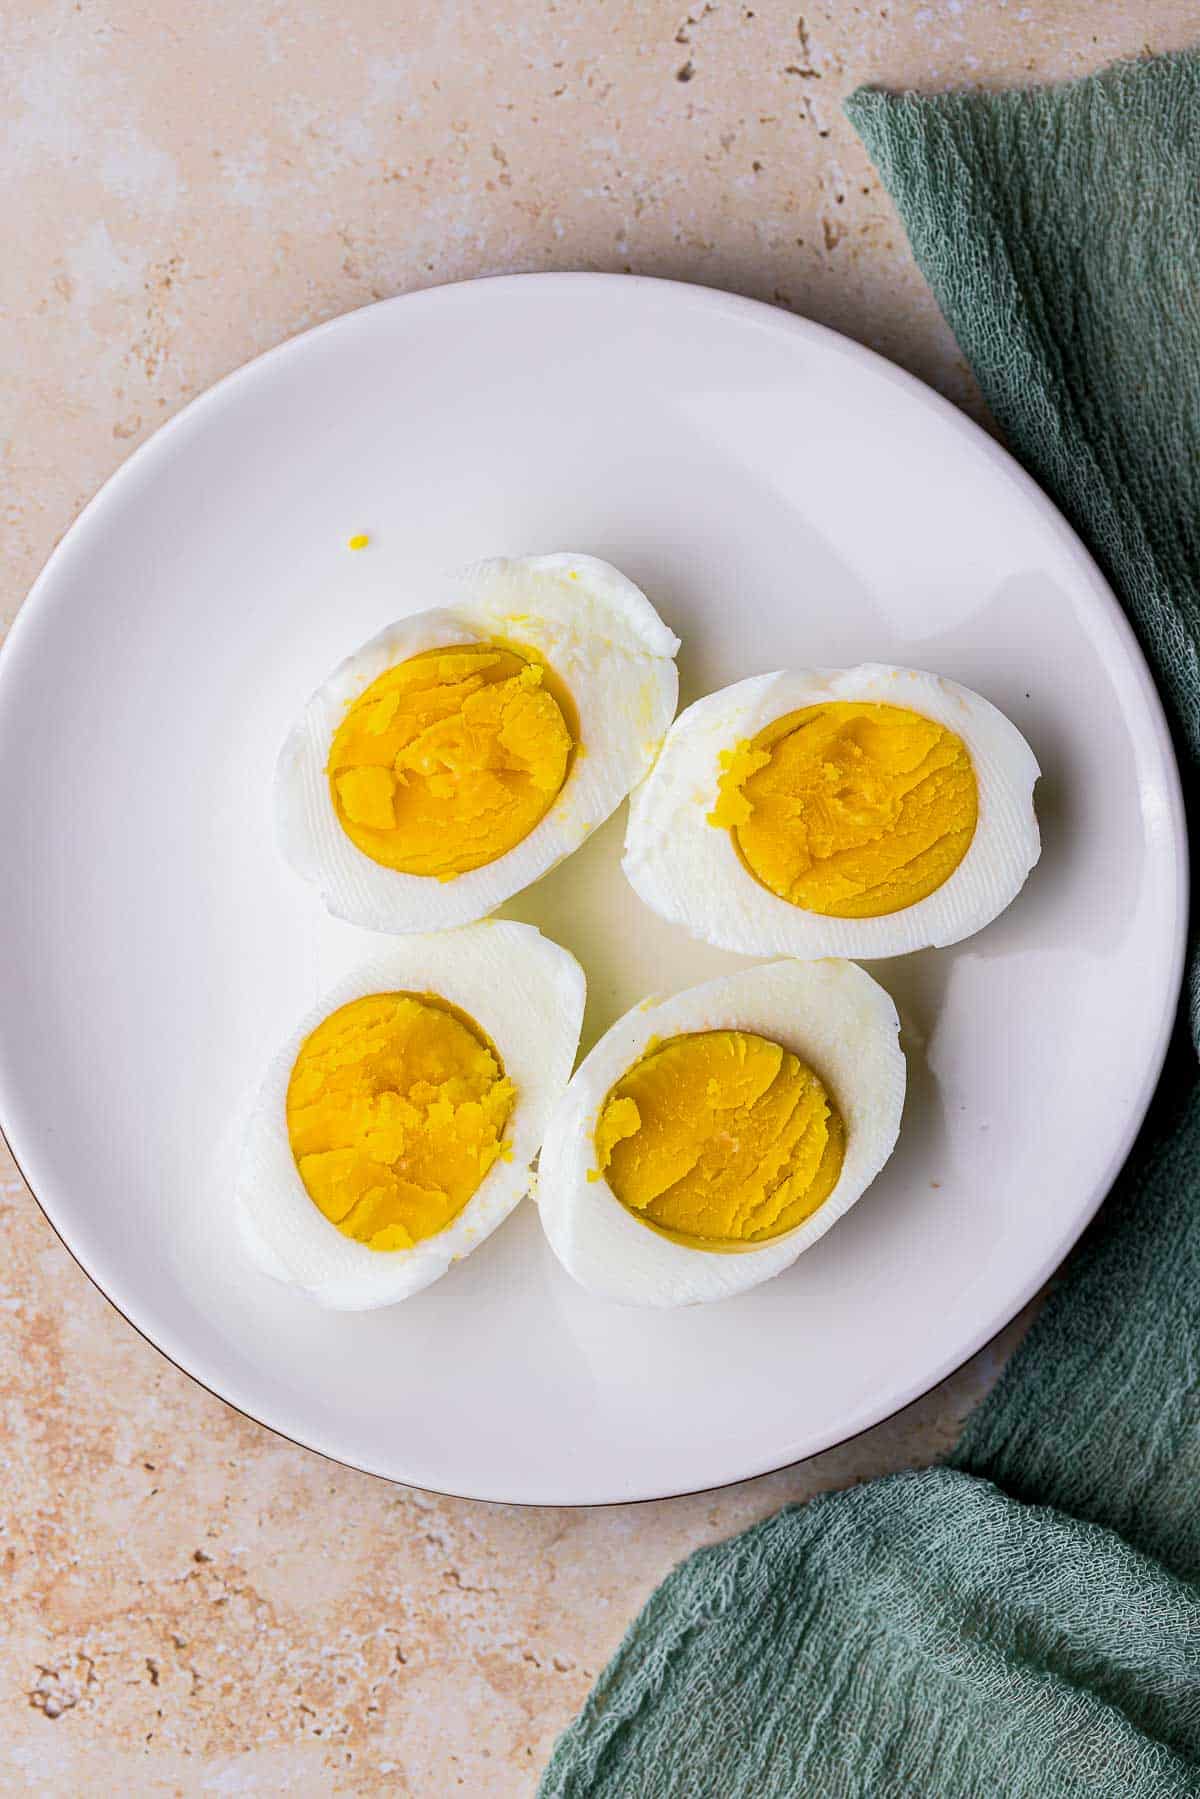 halved hard boiled eggs on a plate